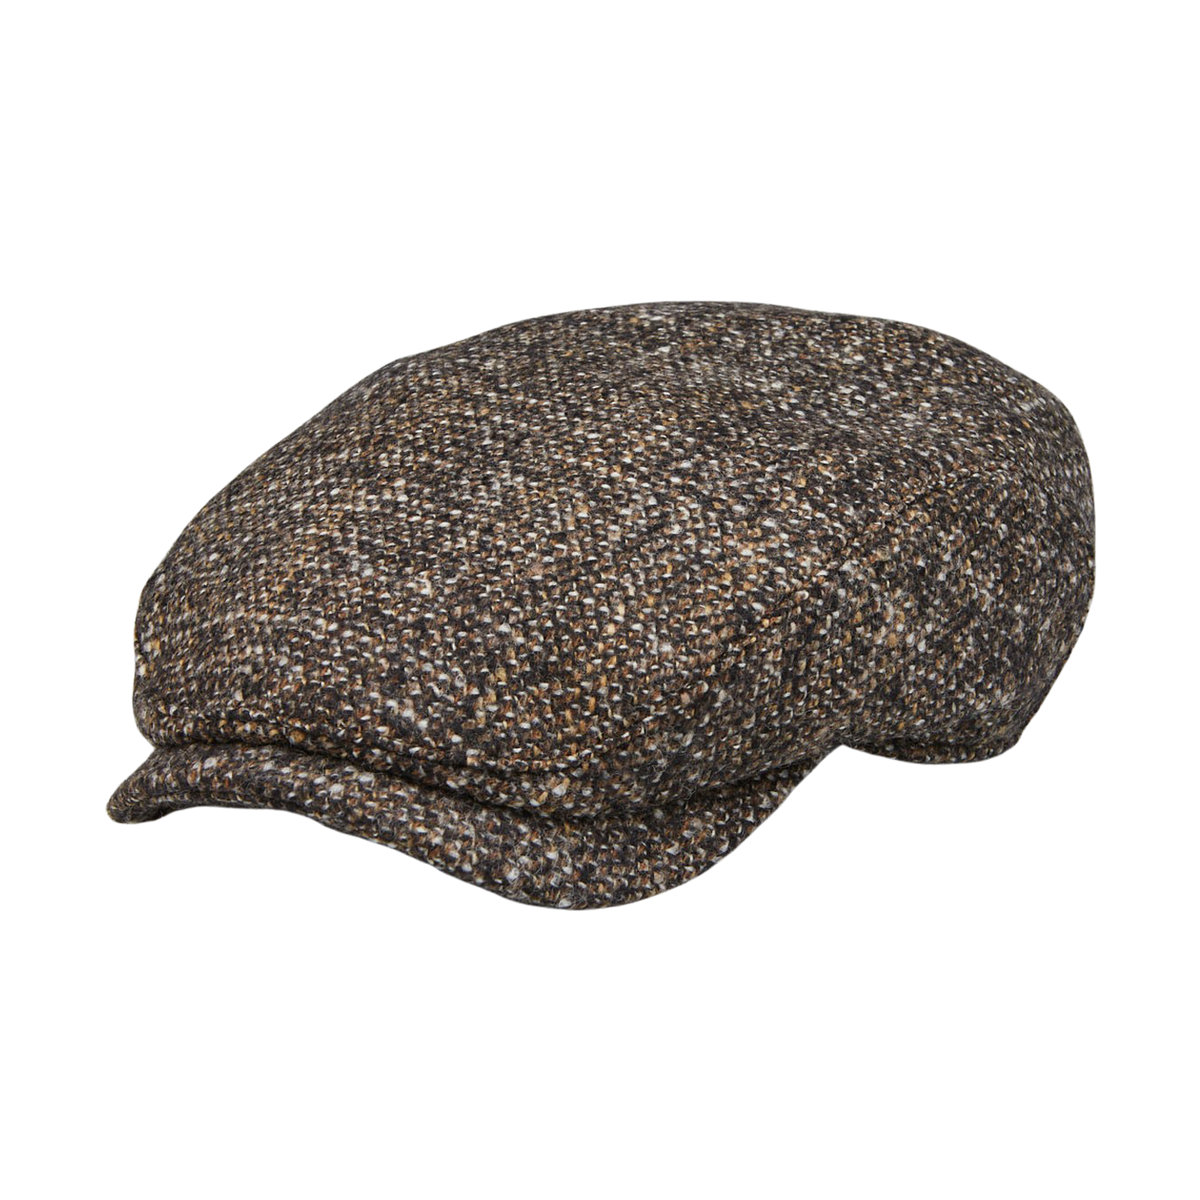 A Wigéns Brown Melange Wool Ivy Contemporary Cap on a white background.